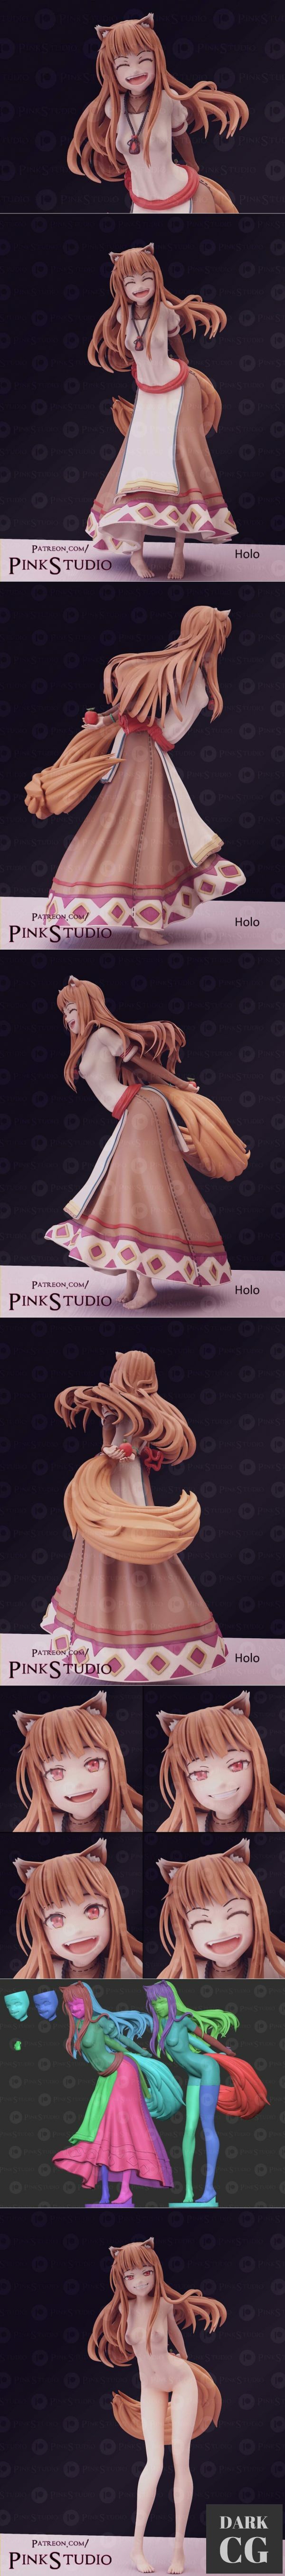 3D Model Holo spice and wolf